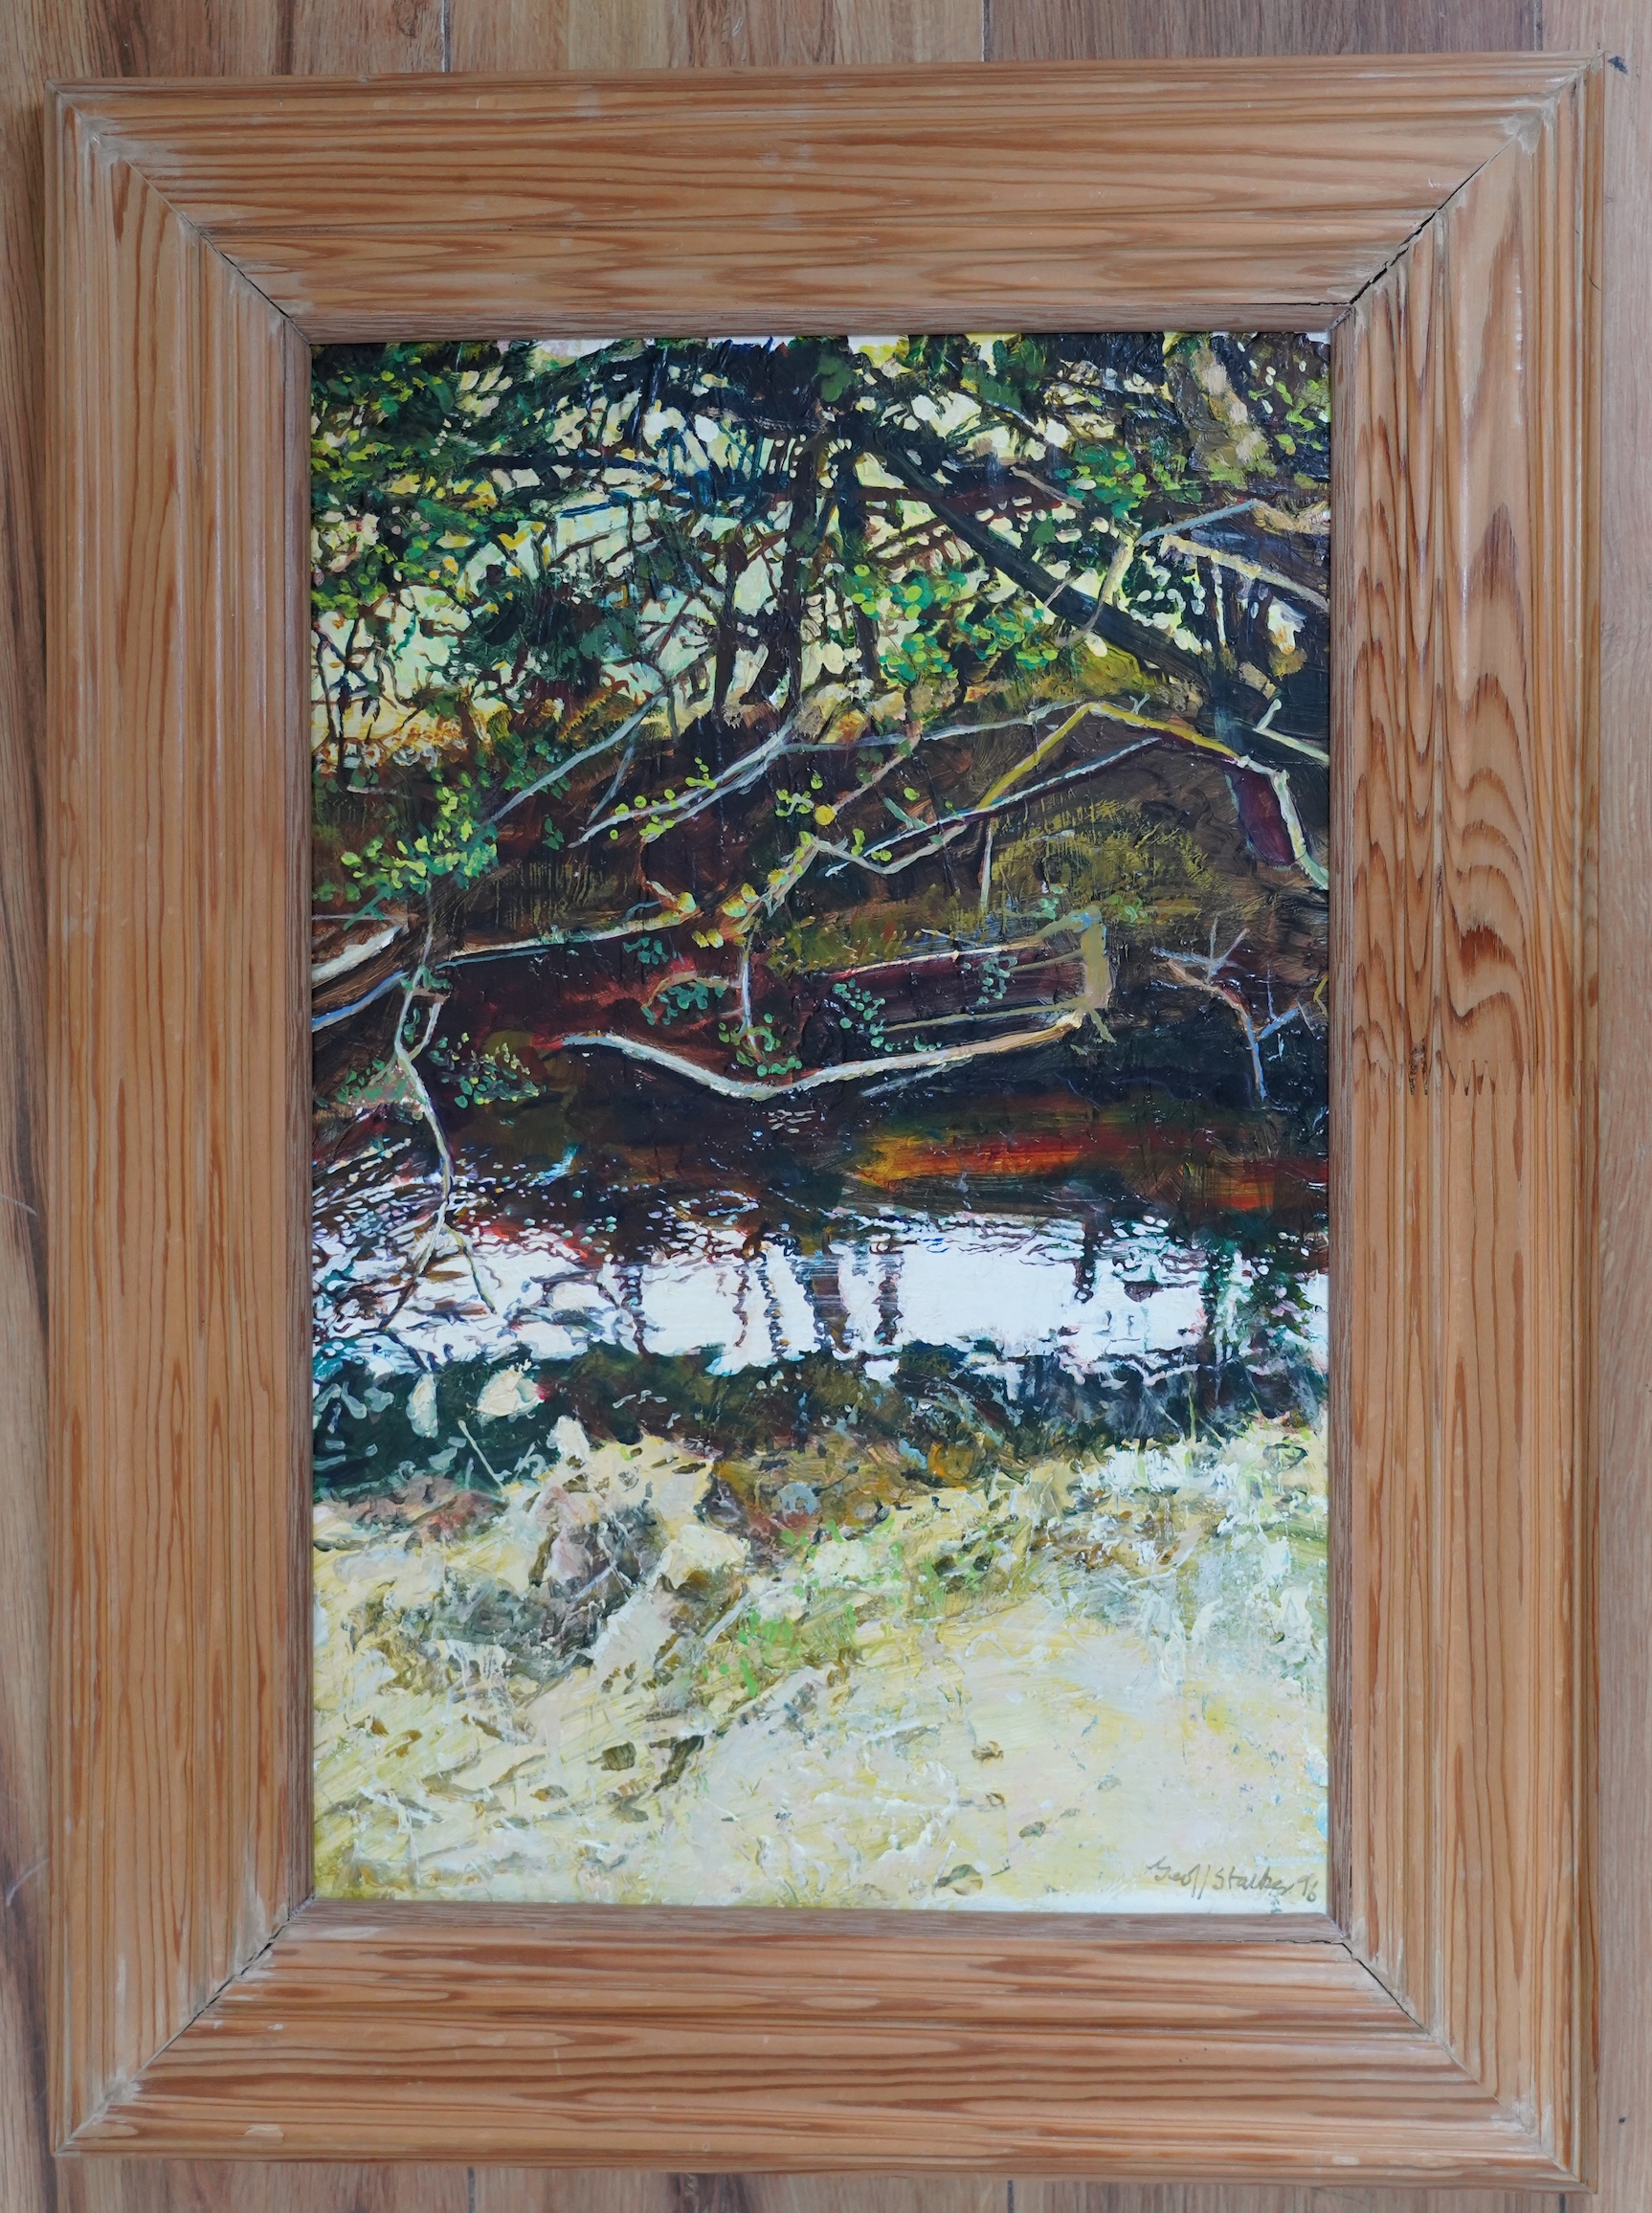 Geoff Stalker (b.1948), oil on board, Reflection of trees in a stream, signed and dated '96, 45 x 29cm